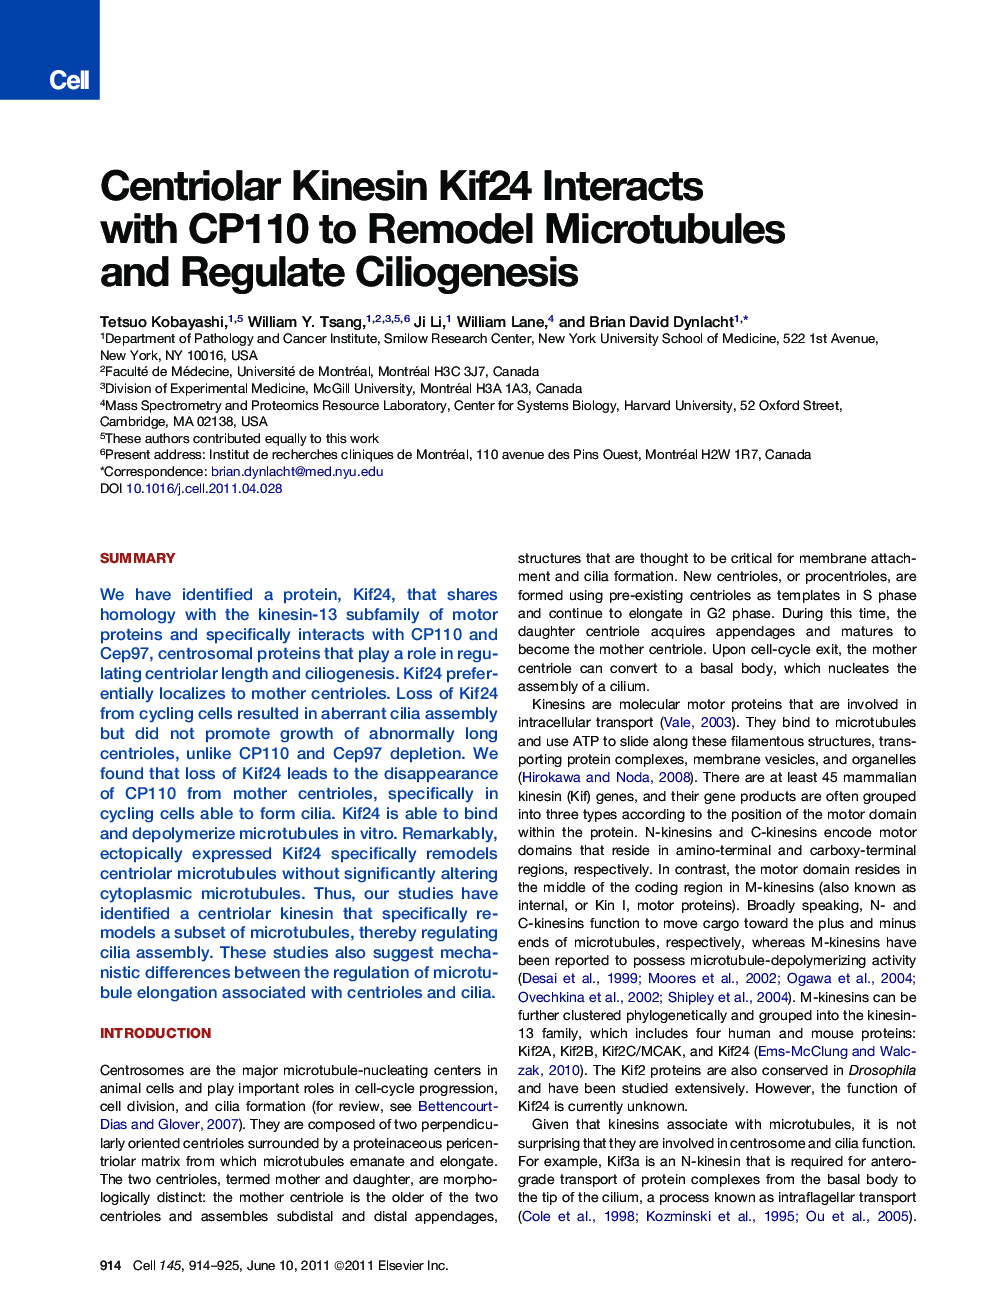 Centriolar Kinesin Kif24 Interacts with CP110 to Remodel Microtubules and Regulate Ciliogenesis